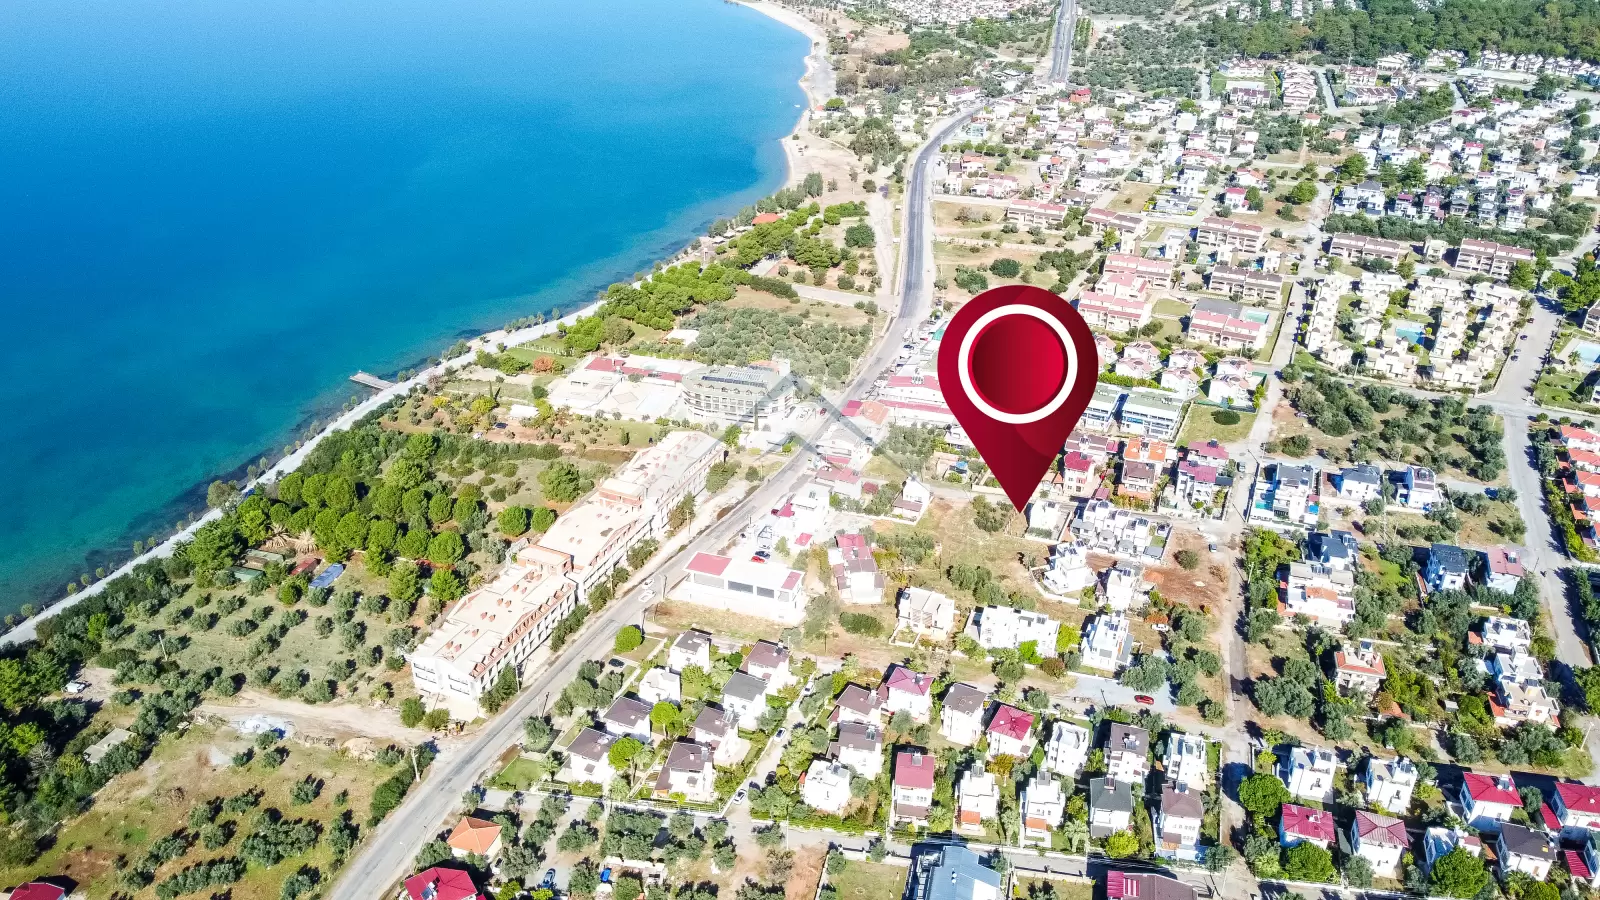 Land For Sale in Akbük Center, 200 Meters From The Sea